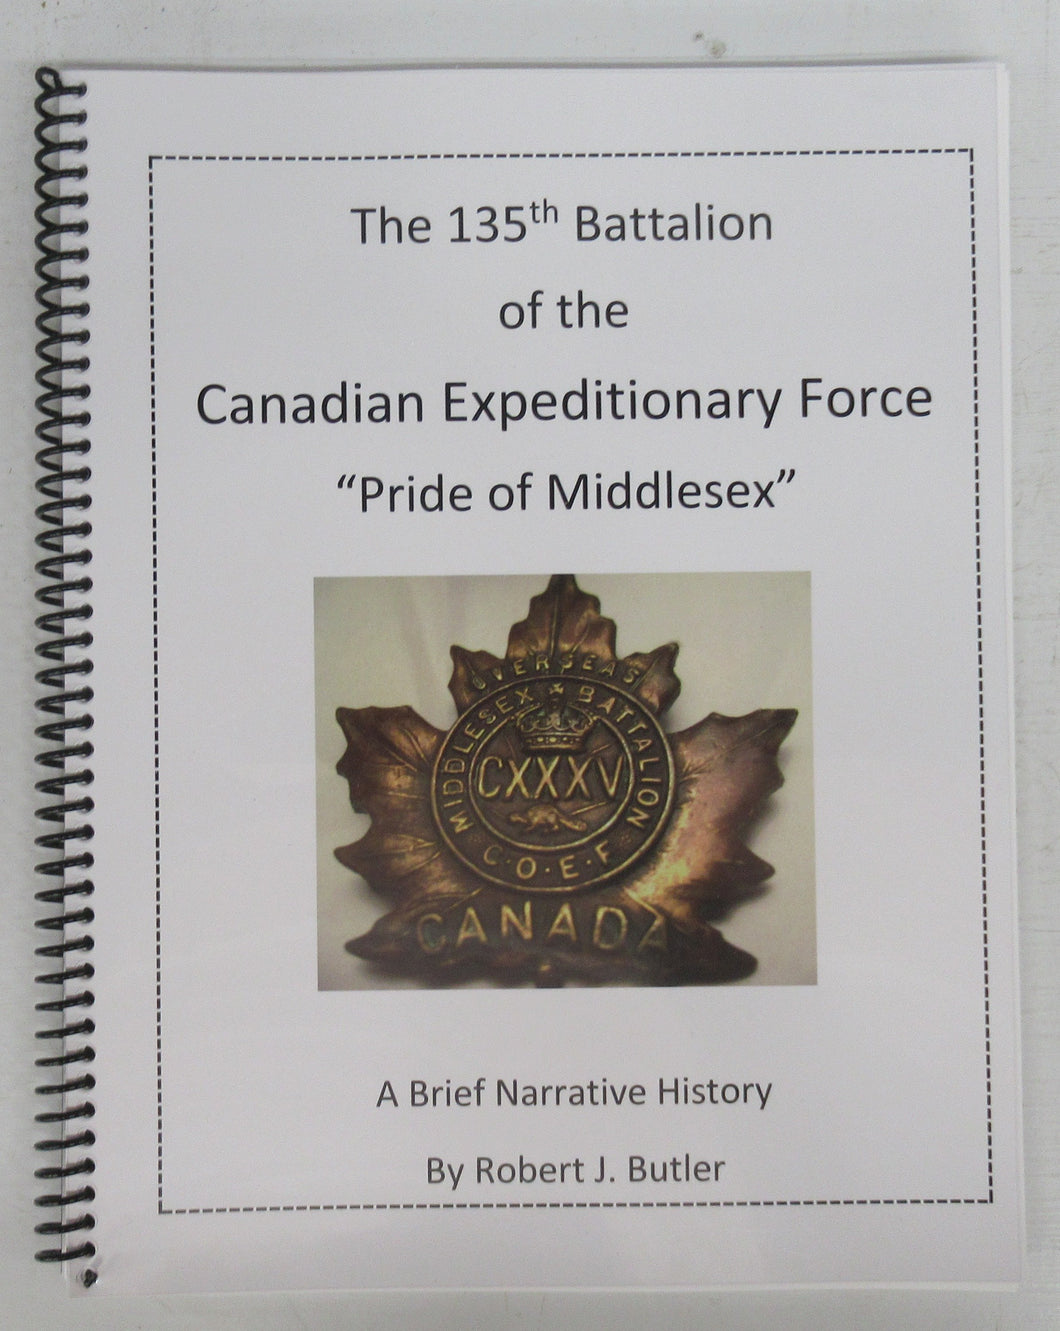 The 135th Battalion of the Canadian Expeditionary Force "Pride of Middlesex": A Brief Narrative History